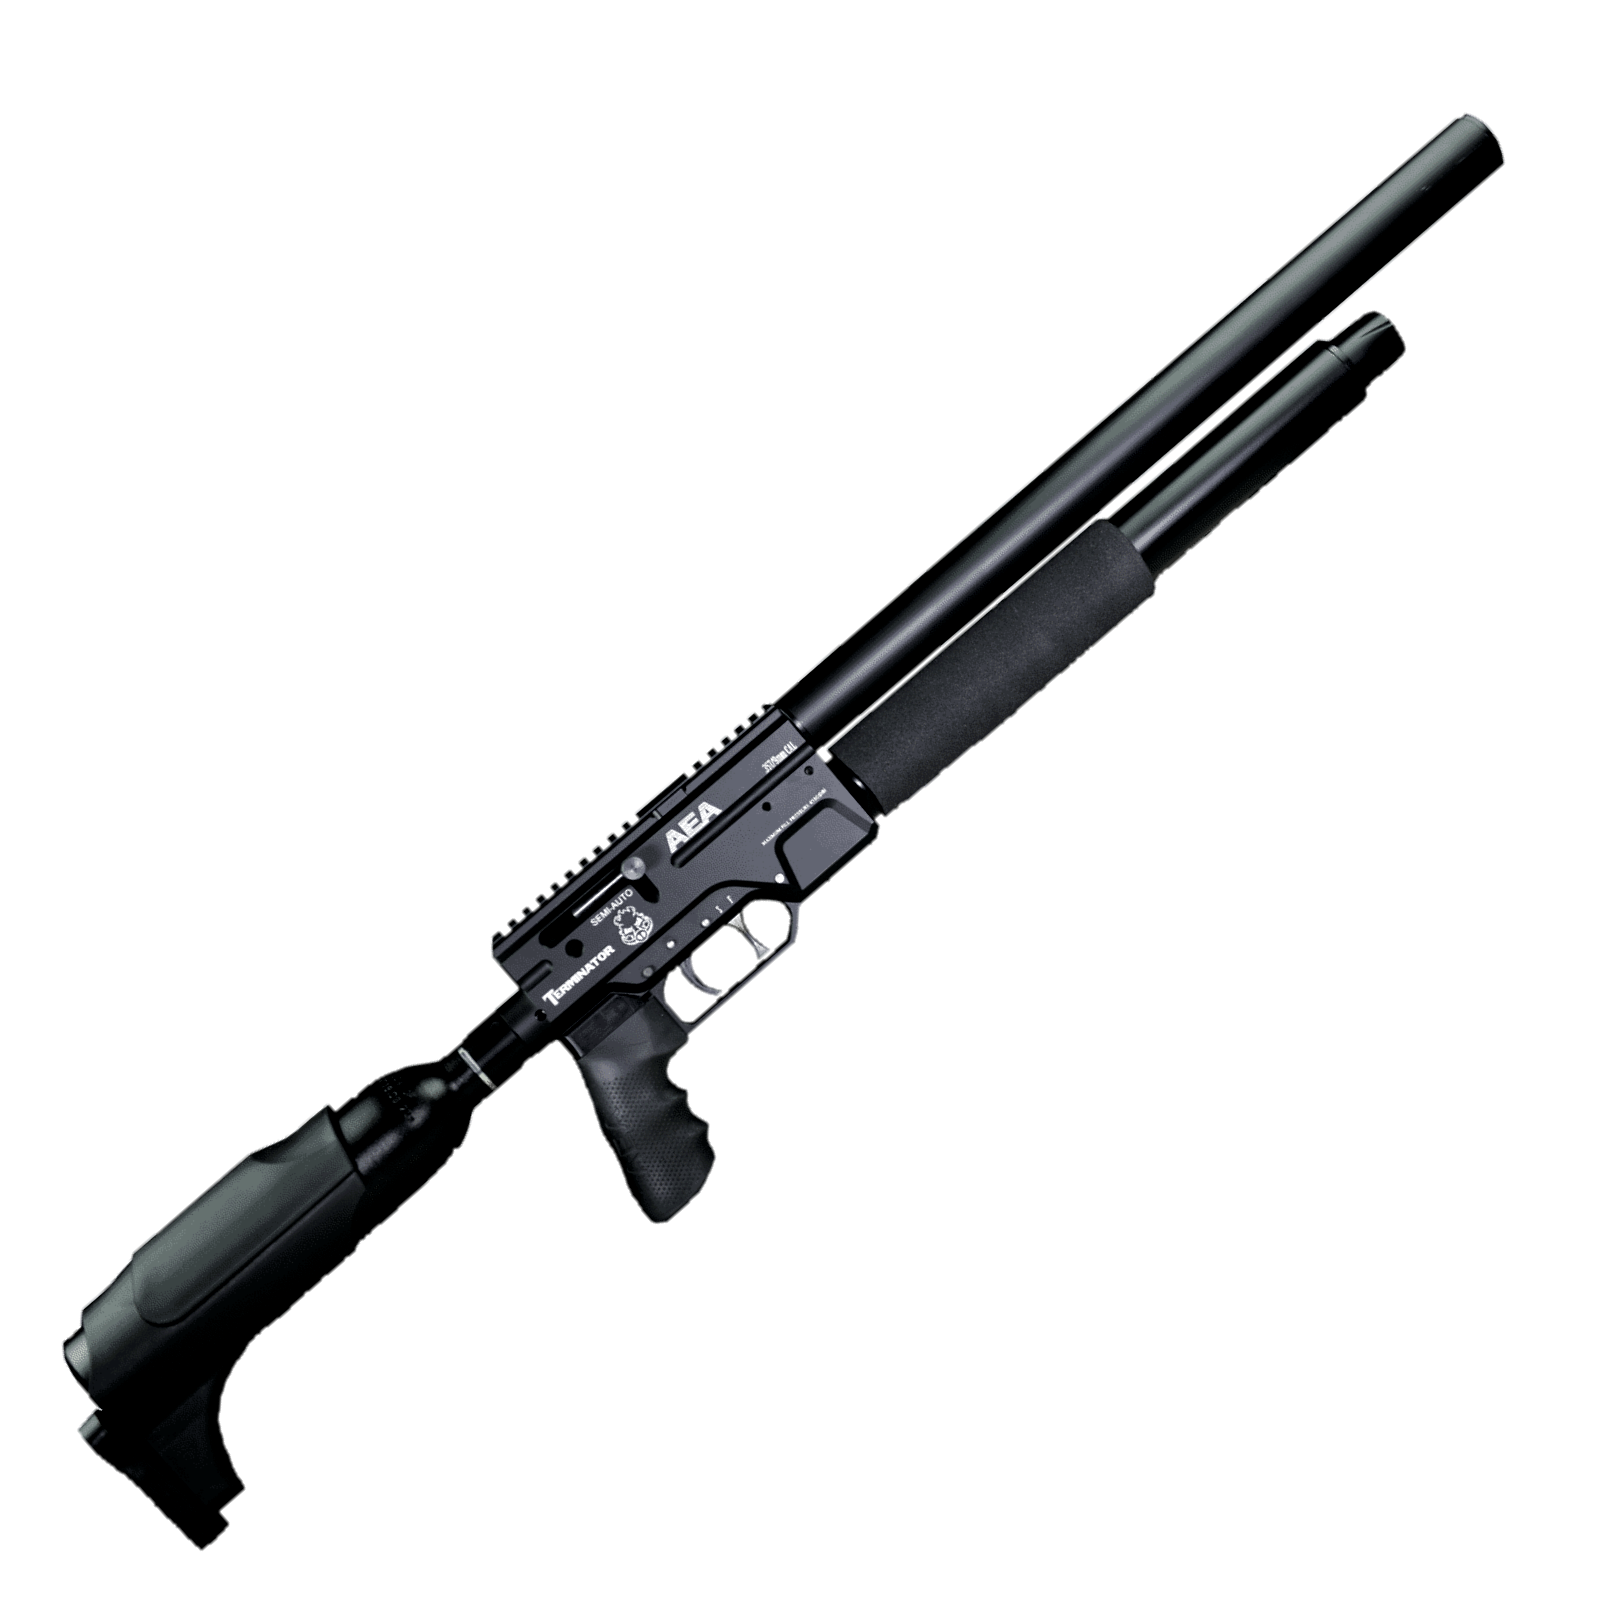 TERMINATOR 2nd GENERATION!!!! THE MOST POWERFUL SEMI-AUTO AIR RIFLE IN THE WORLD